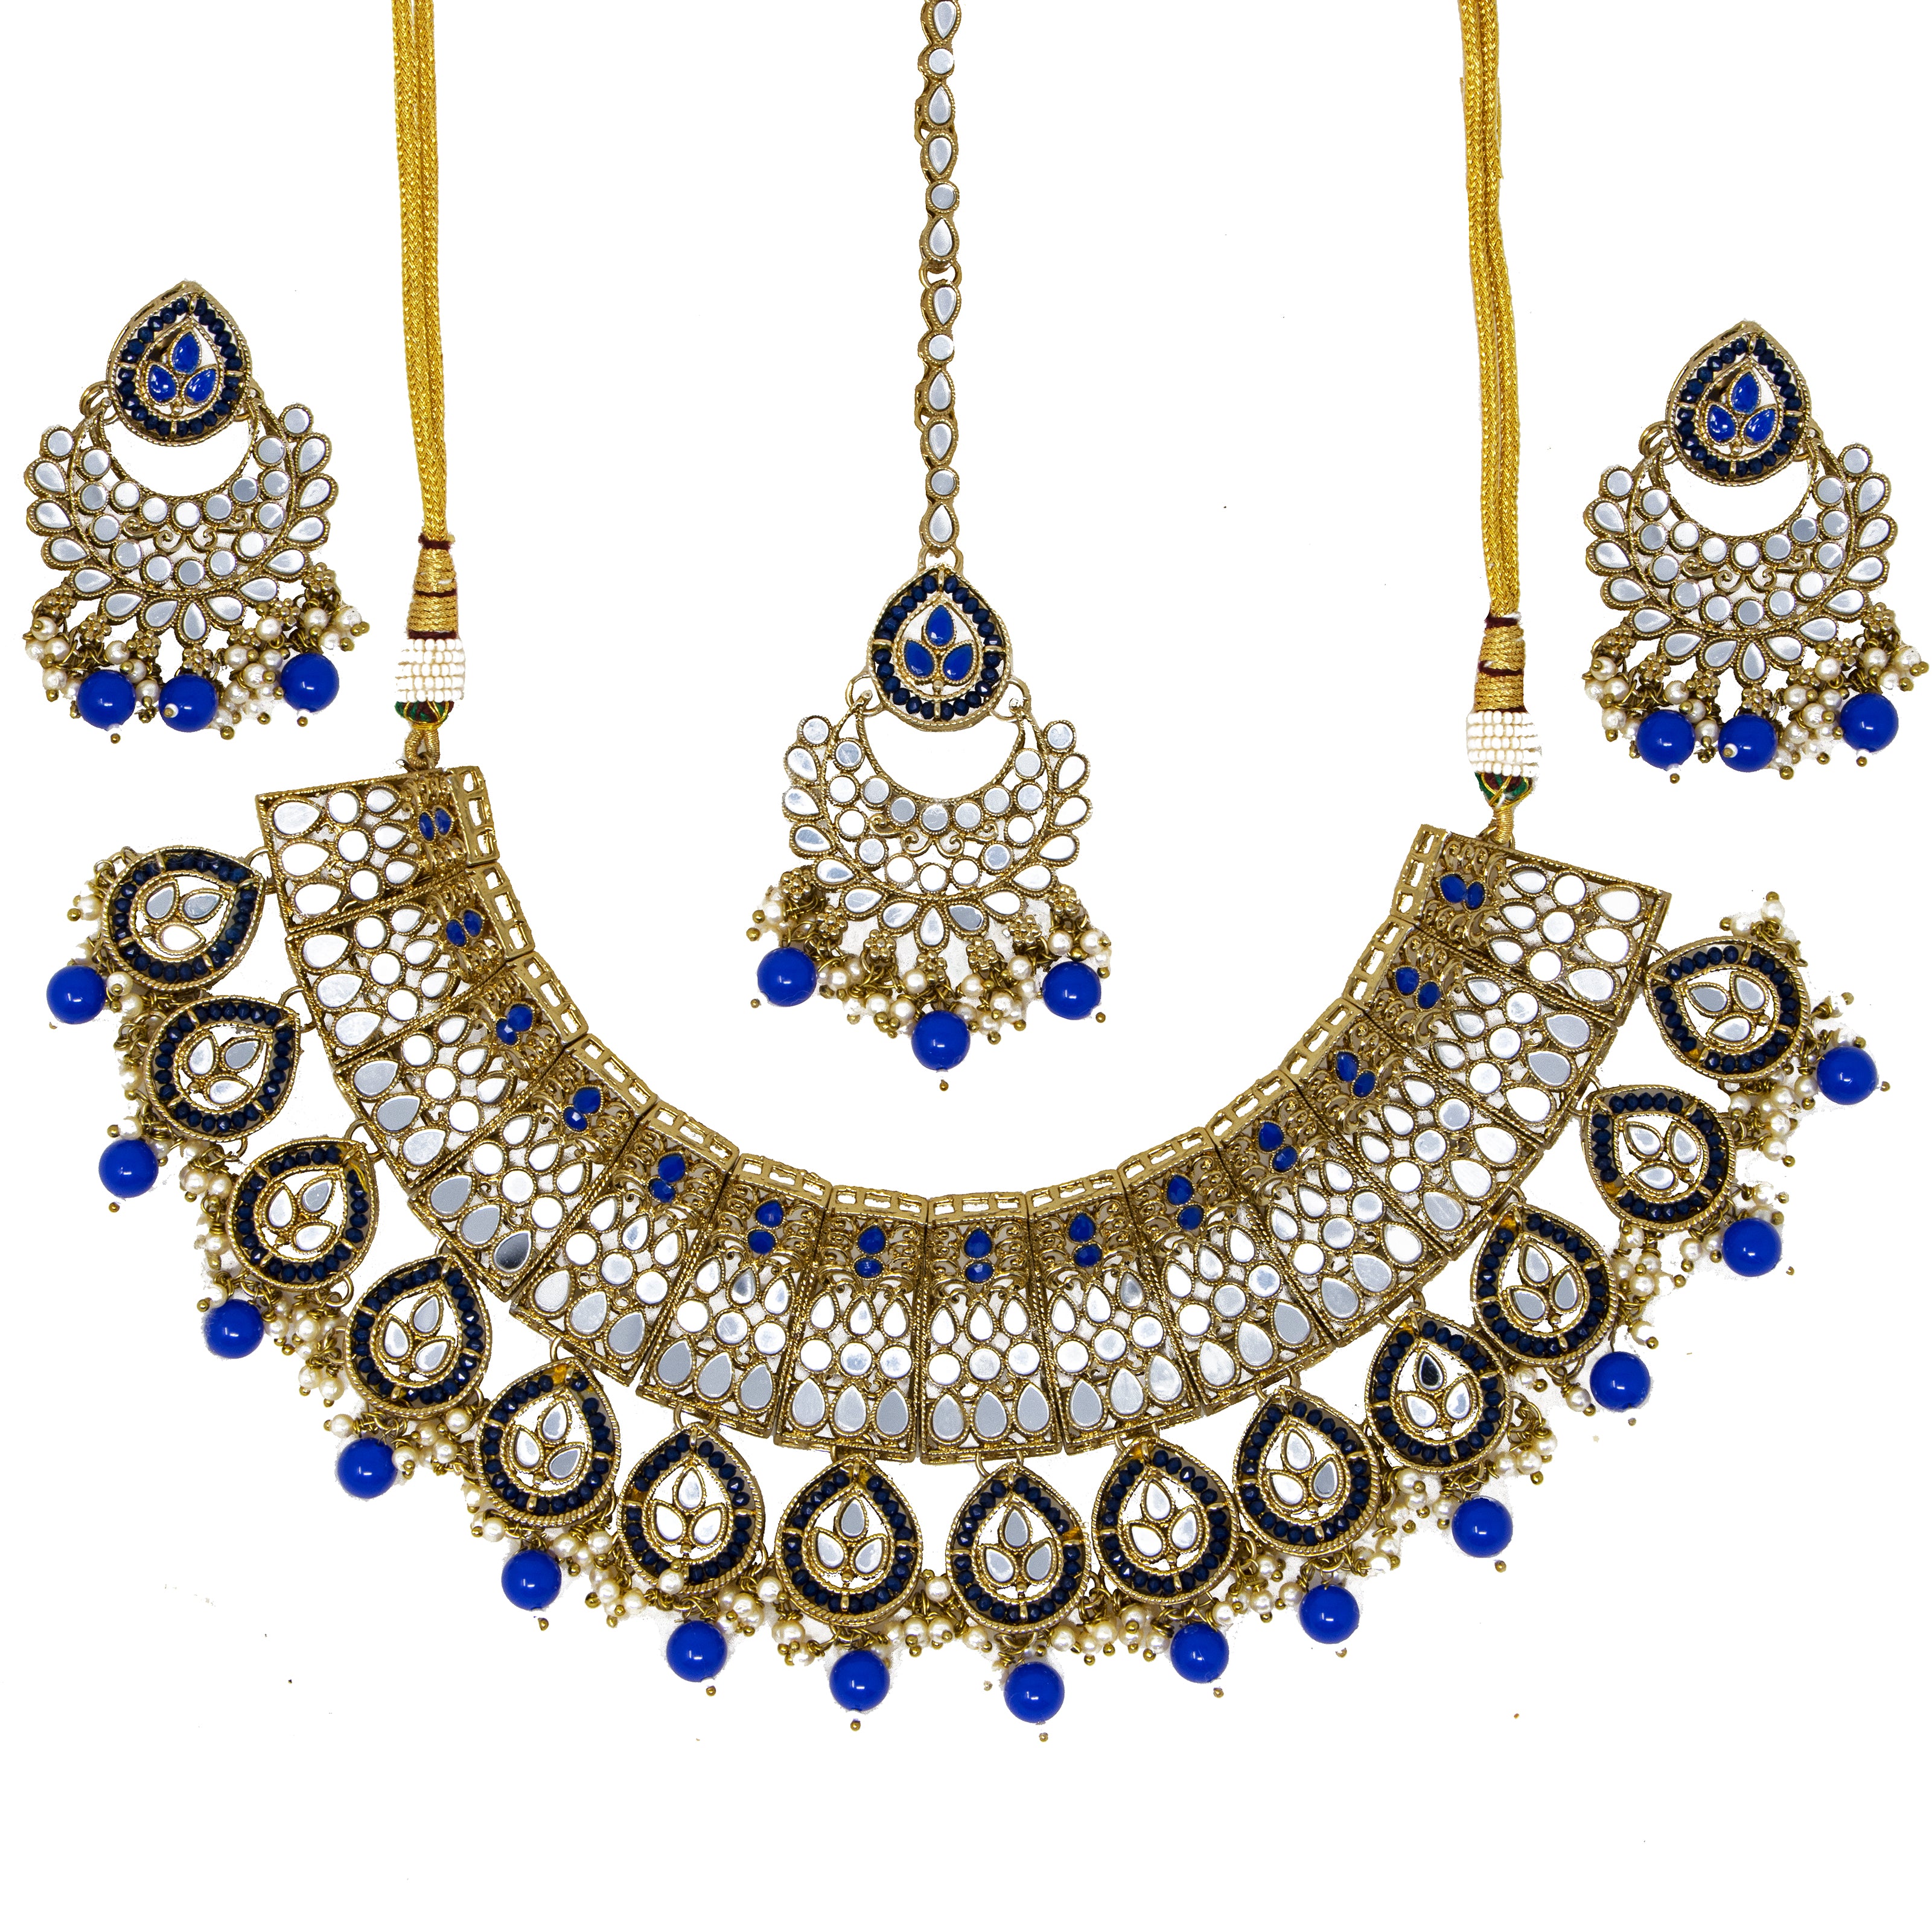 Champagne silver, gold/navy 3 piece jewelry set- Necklace, earrings,& bindi with mirror work, crystals, beads